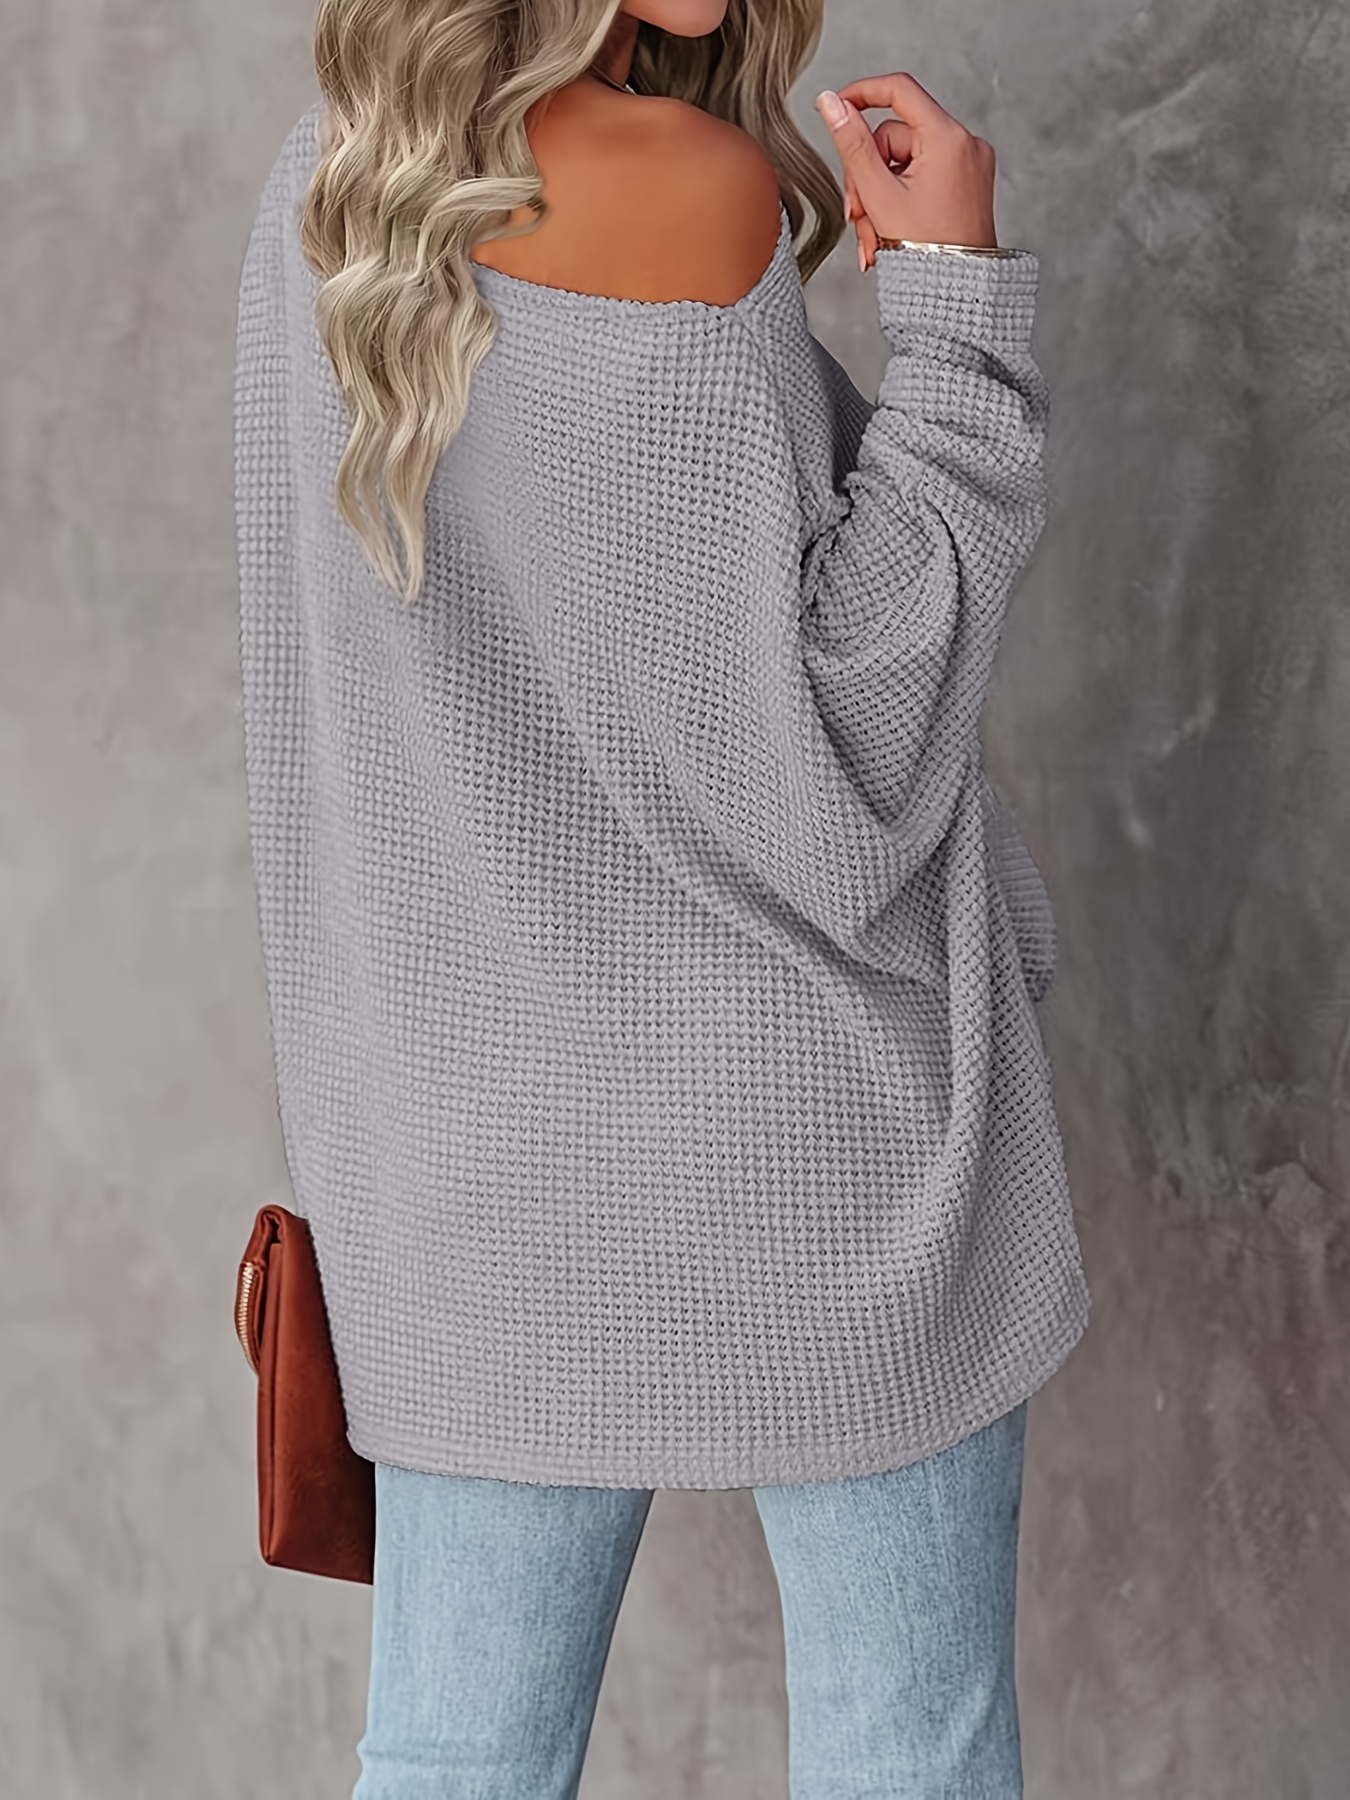 ReachMe Womens Oversized Off The Shoulder Tops Long Sleeve Waffle Knit  Shirt Drop Shoulder Sweater Top